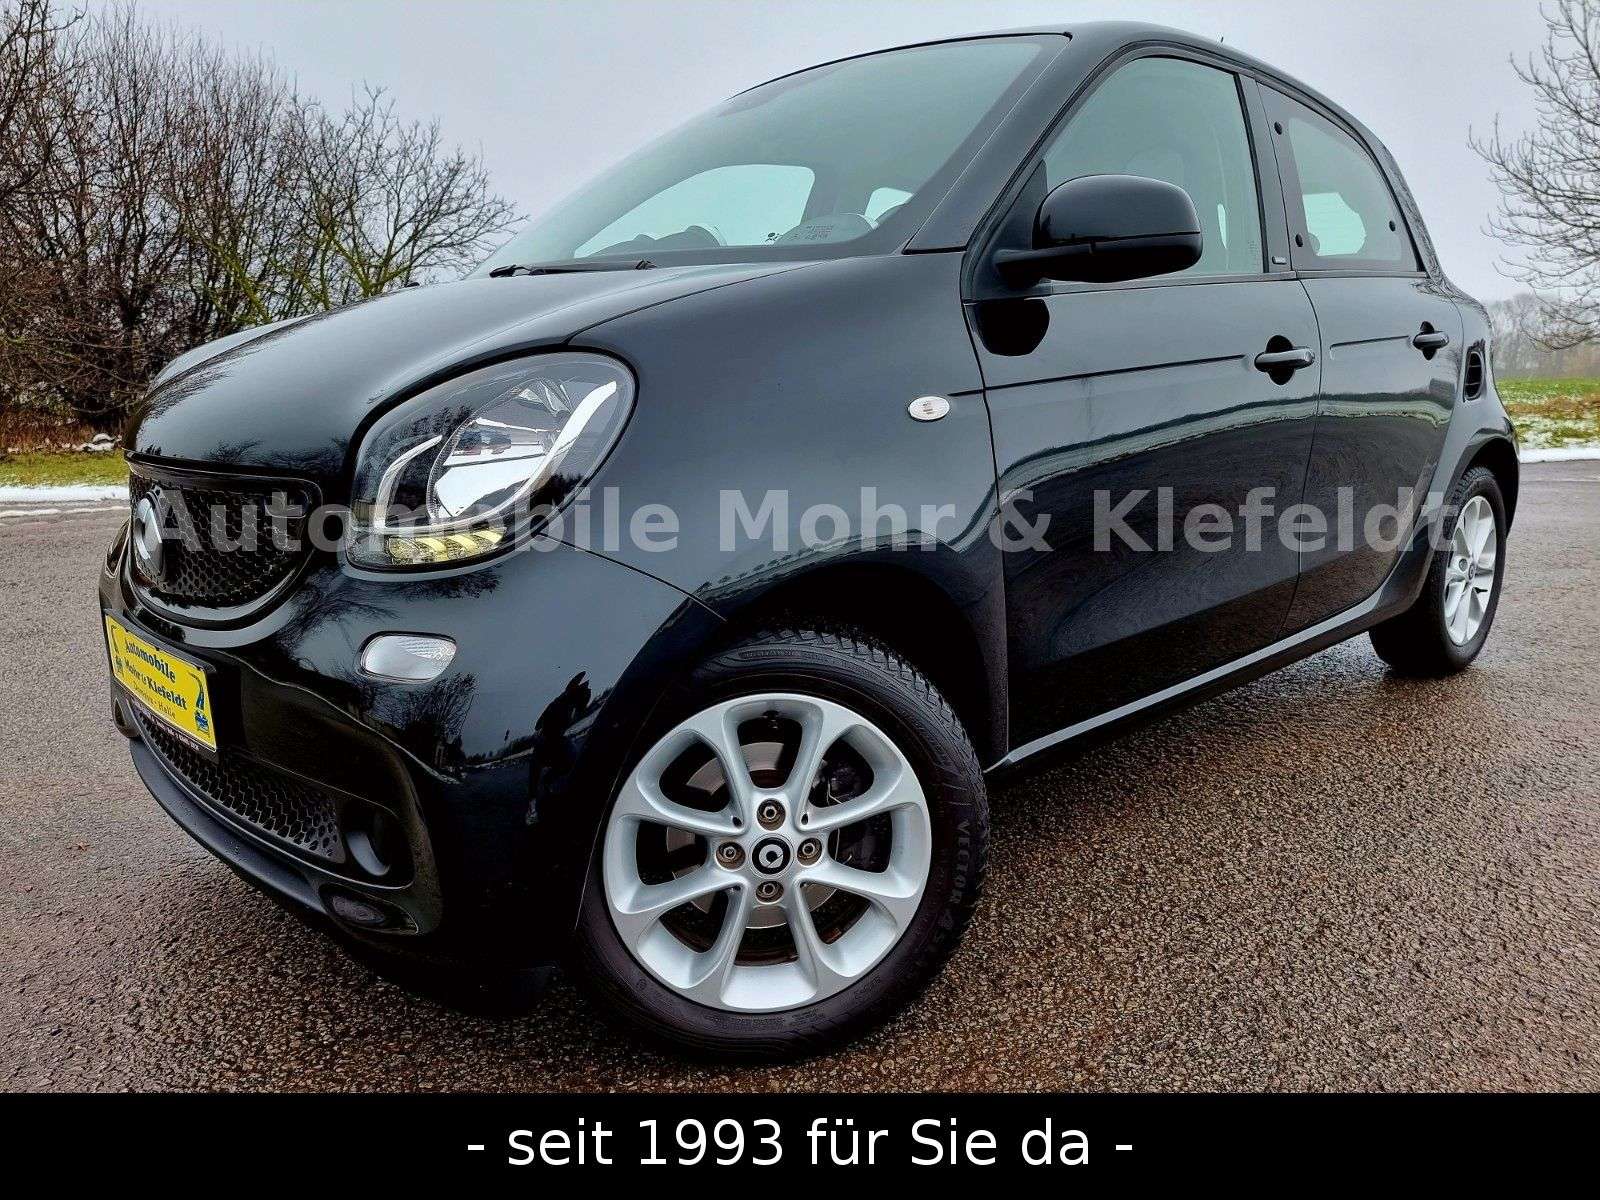 smart forFour Compact in Black used in Halle-Neustadt for € 8,499.-